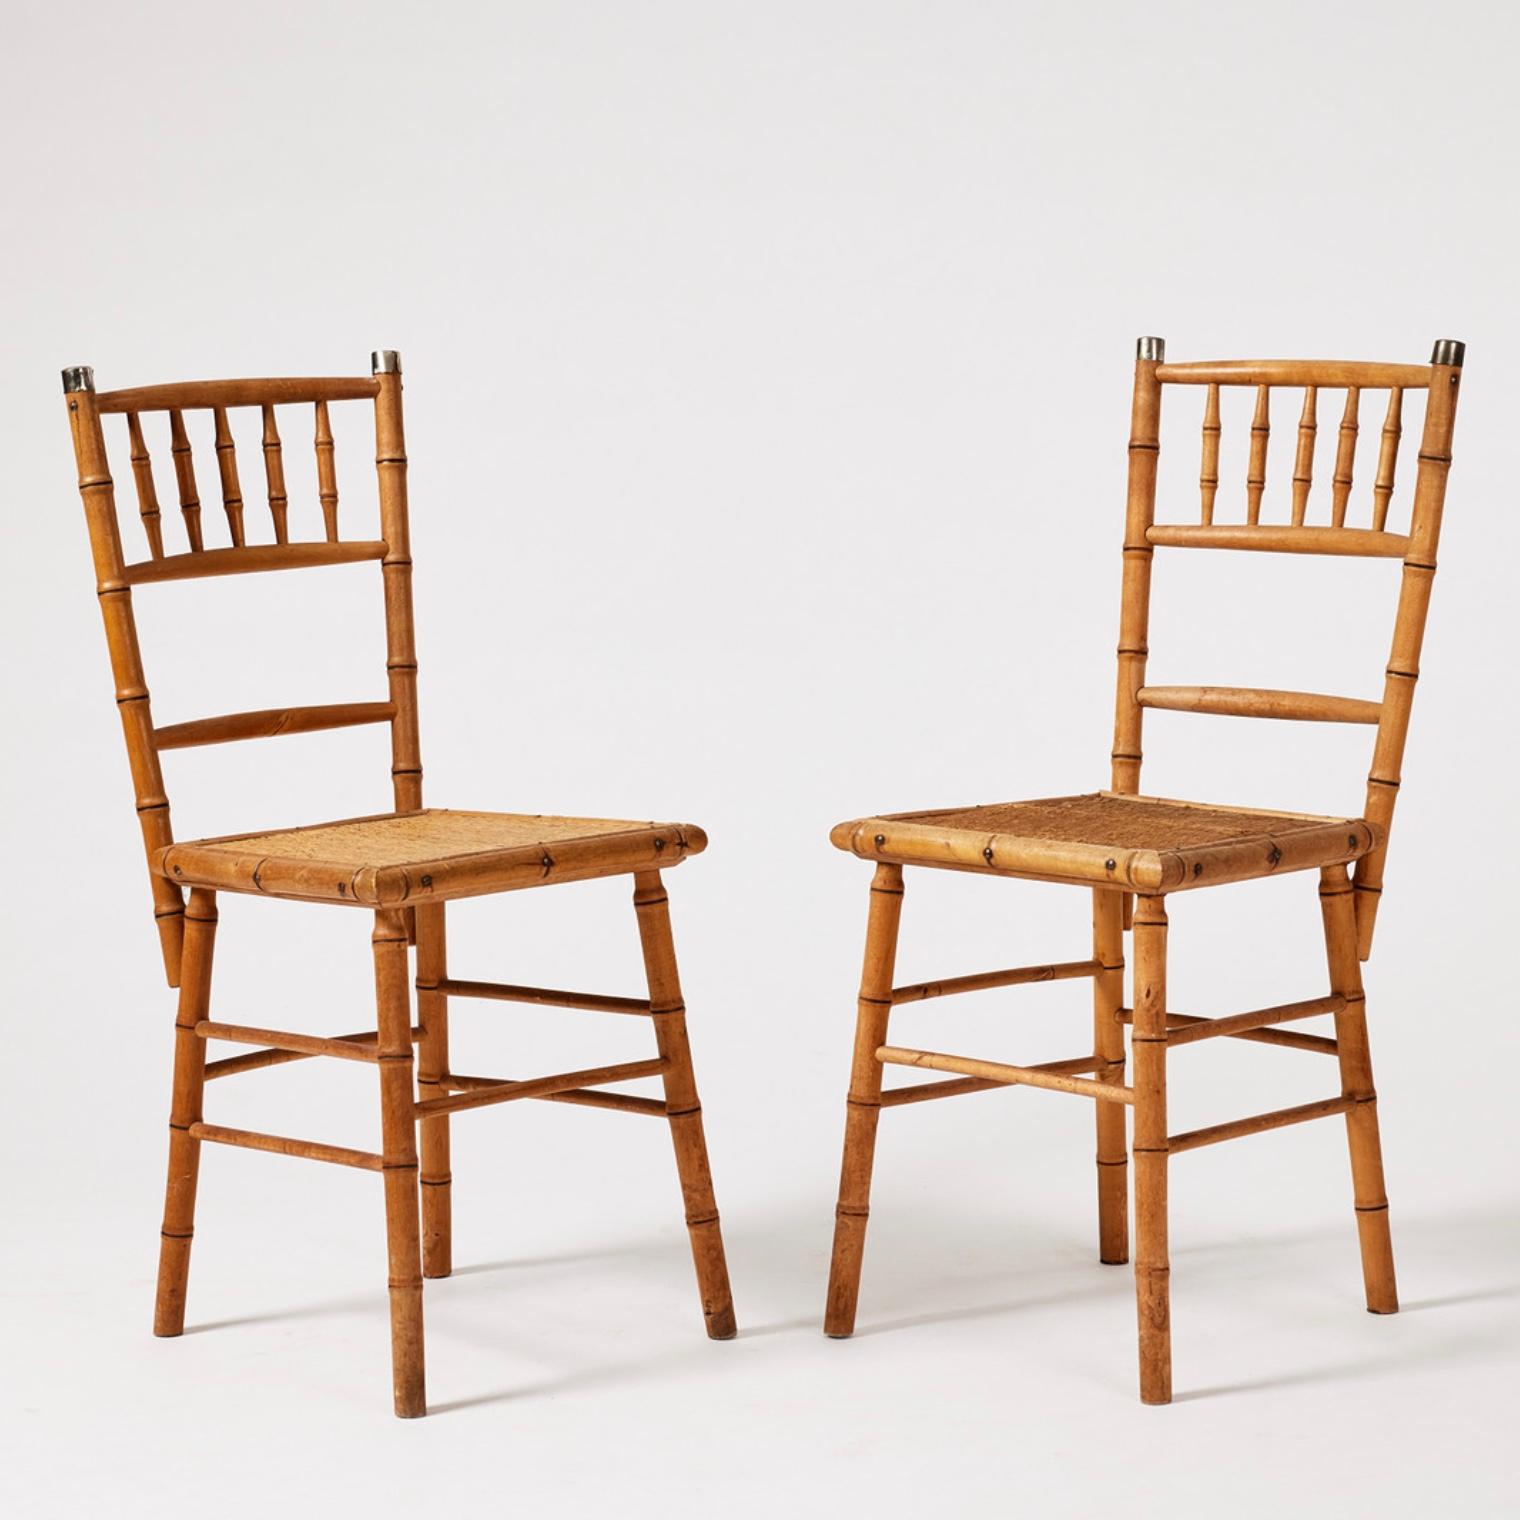 Set of four late Circa 19th century faux bamboo beech dining chairs made for Bodafors with rush mat in the Japanese style to the seats.
Wear and tear commensurate with their age and use. One nickel plated cap is missing.

History 
The company